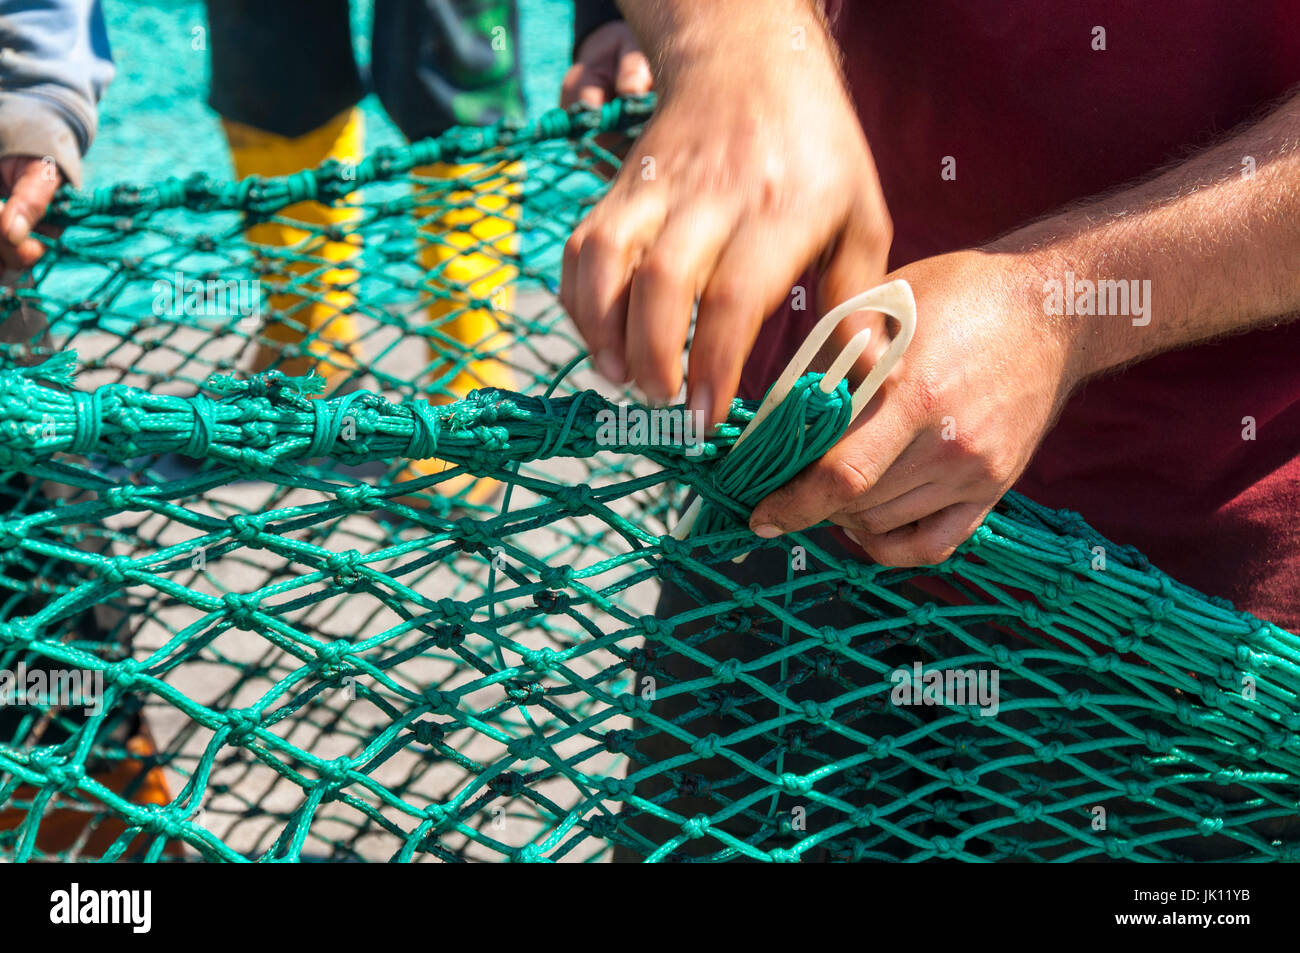 Fishermans hands repairing mending nets in Killybegs Harbour County Donegal Ireland Stock Photo